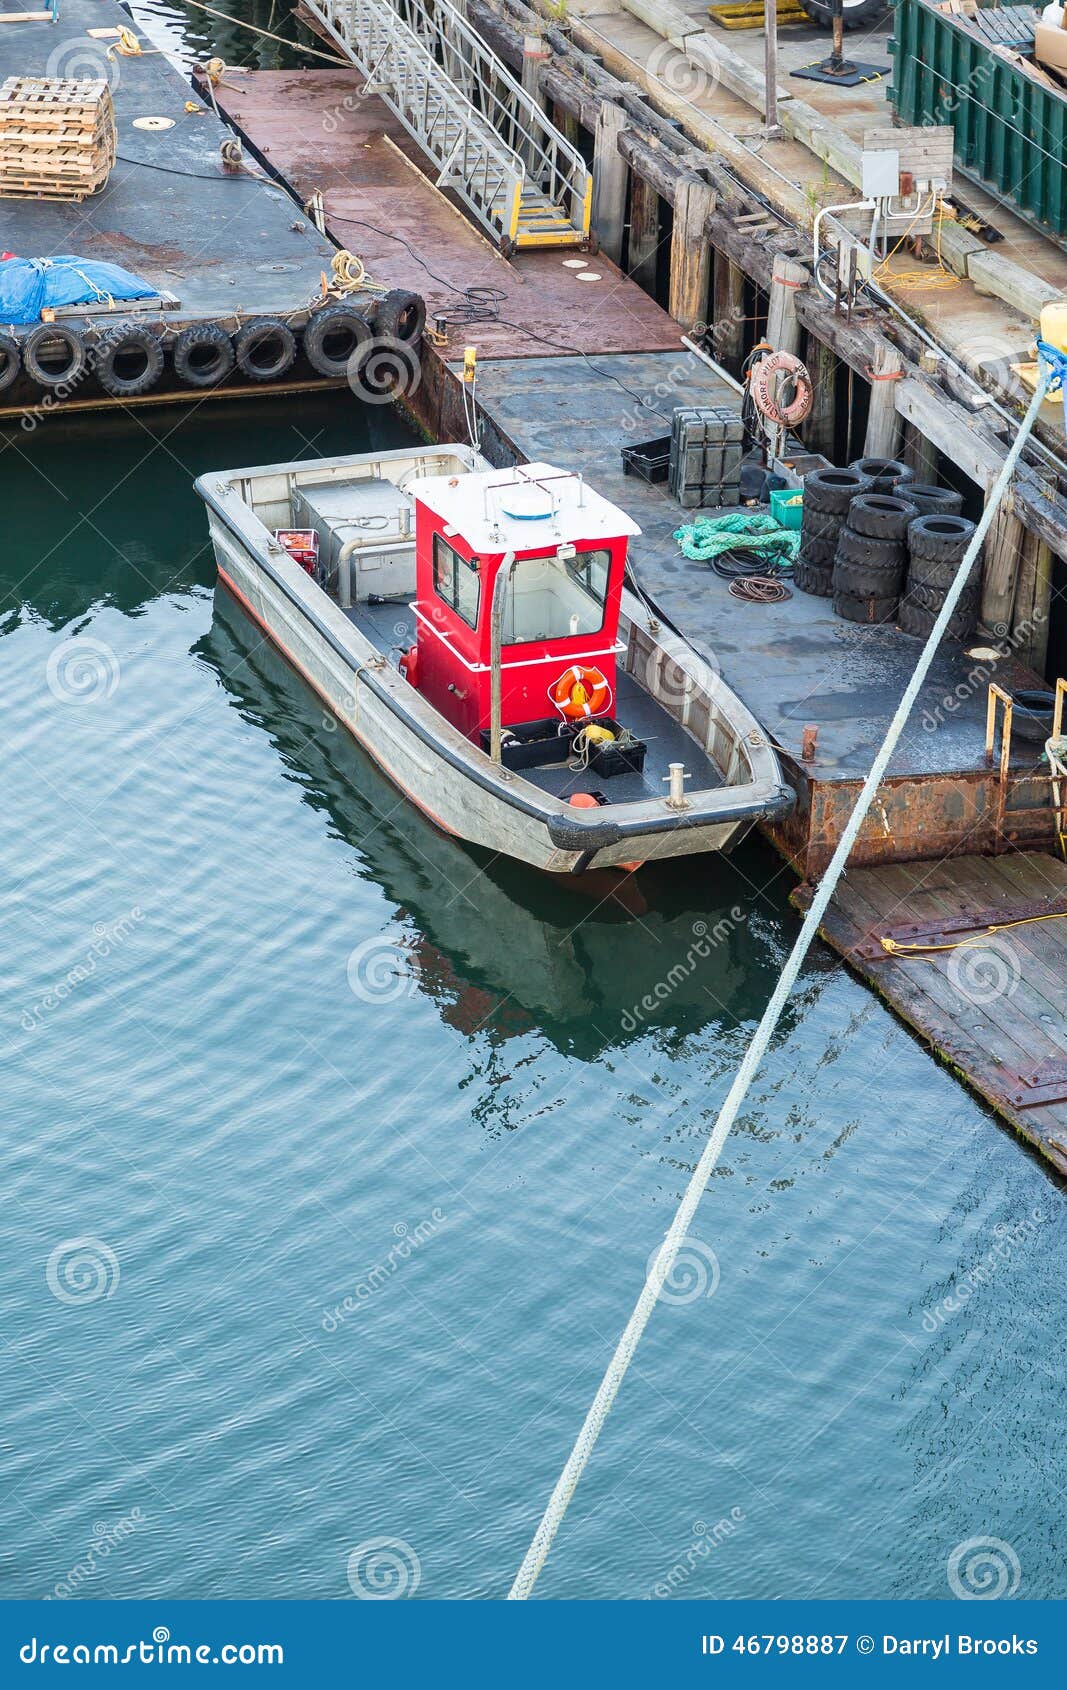 Red Cabin on Small Fishing Boat Stock Image - Image of vessel